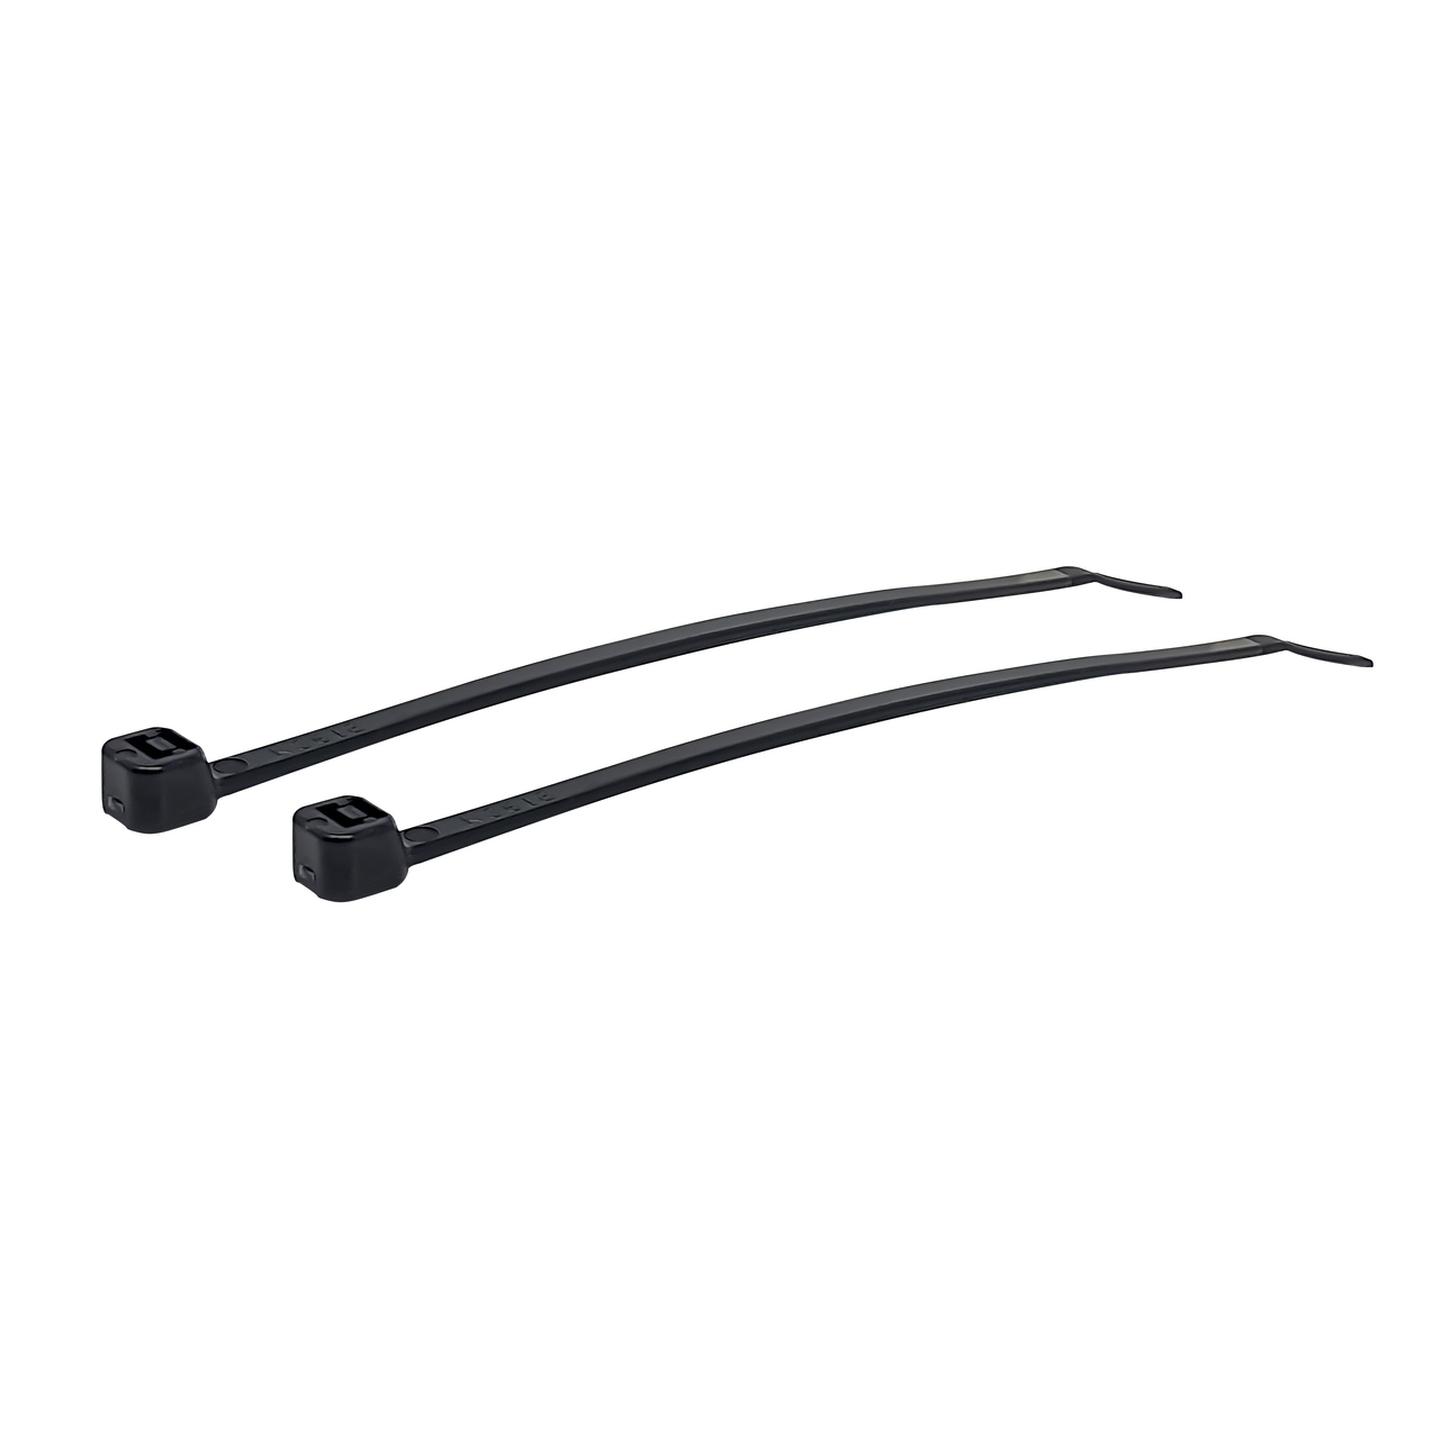 100mm Black Cable Ties - Pack of 500